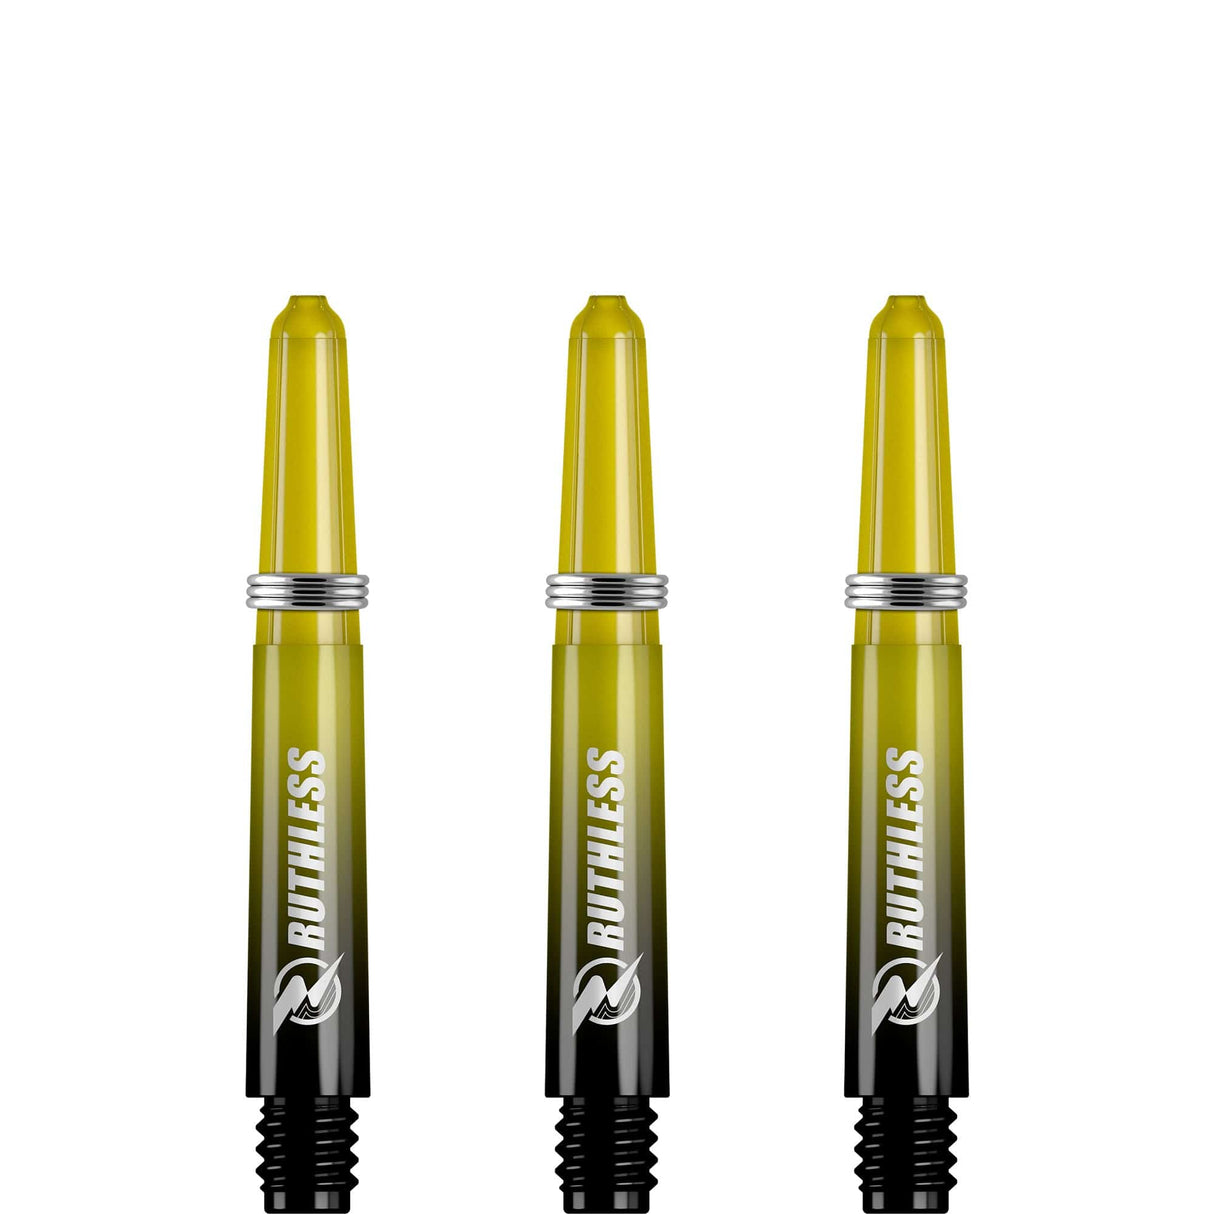 Ruthless Deflectagrip Plus Dart Shafts - Polycarbonate Stems with Springs - Yellow Short